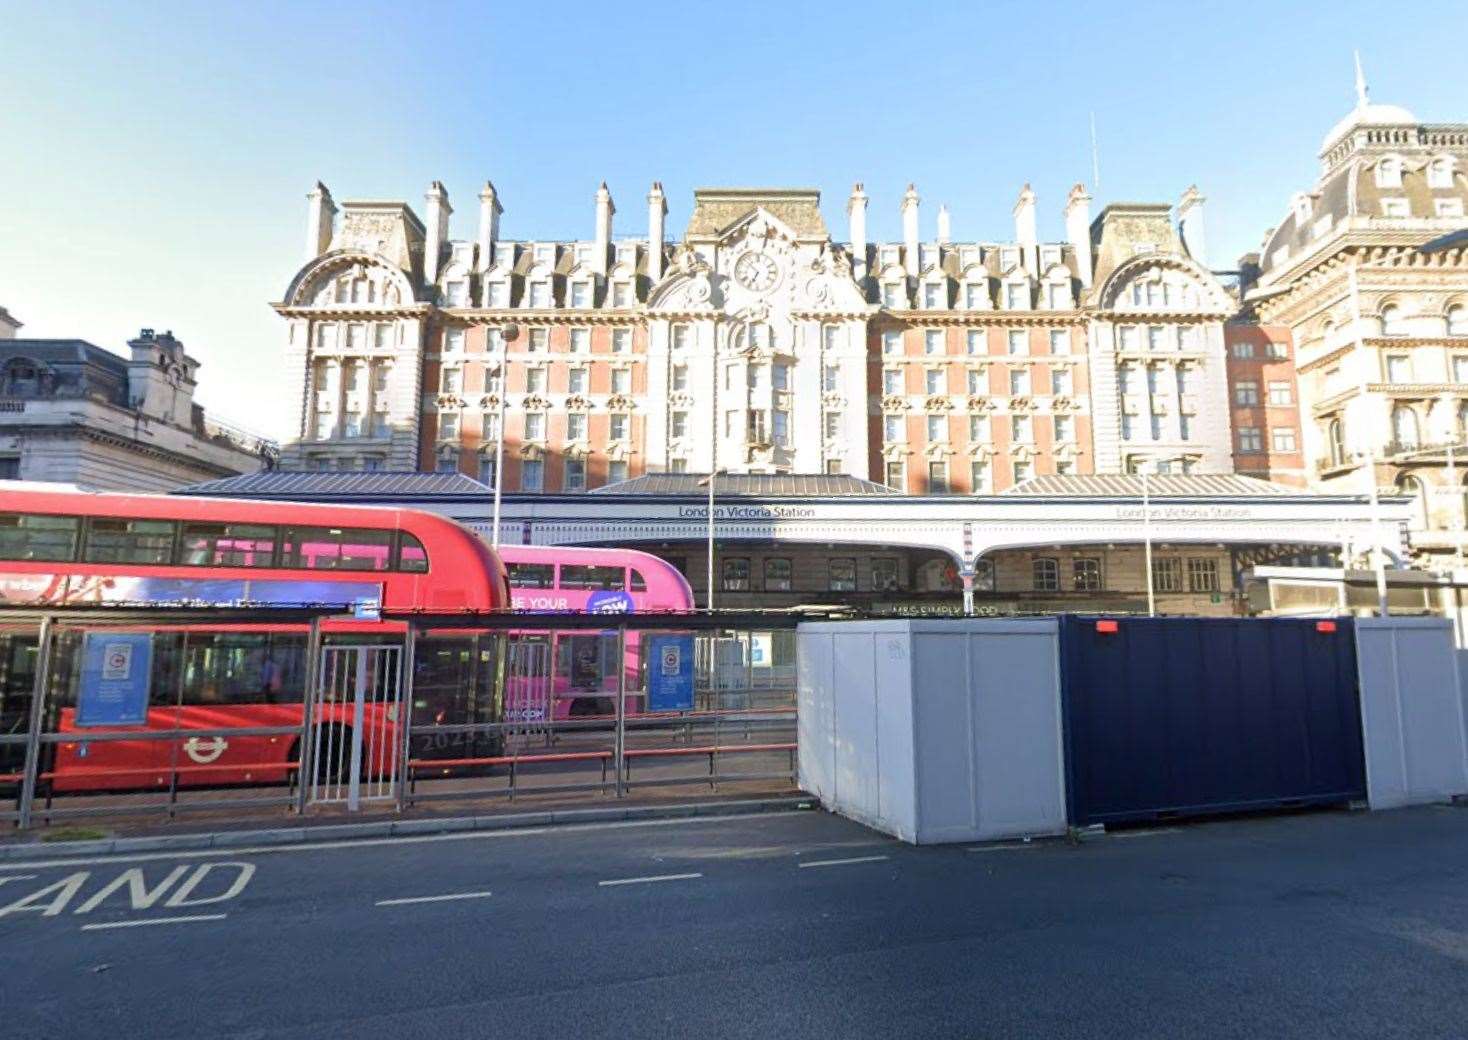 The incident took place outside London Victoria Station. Picture: Google